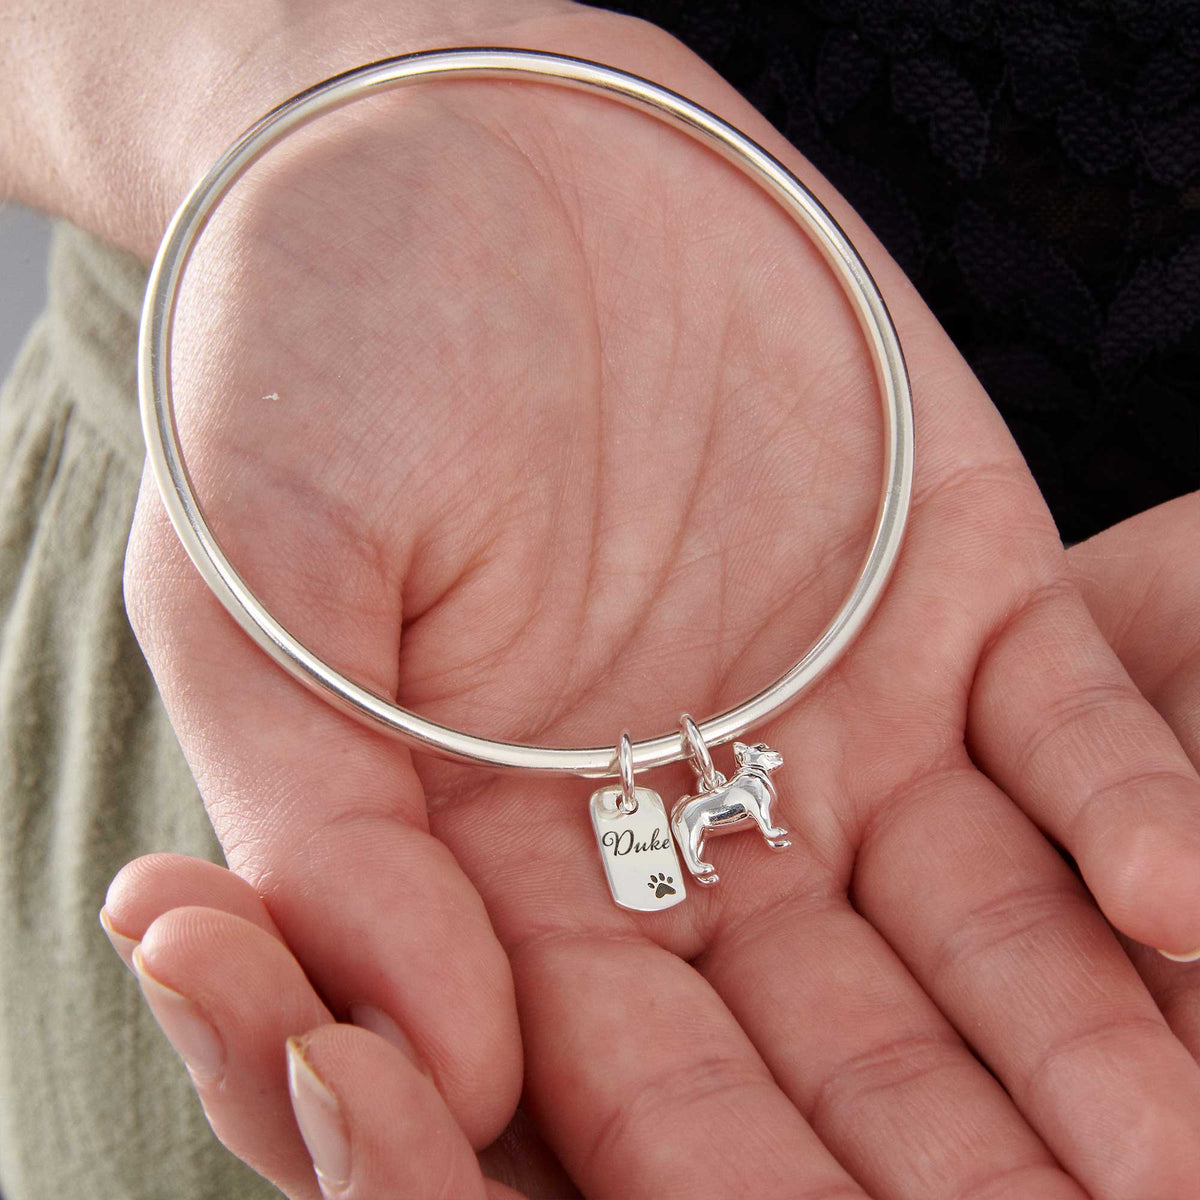 personalised pug jewellery gift silver charm bangle sterling silver made in UK Scarlett Jewellery